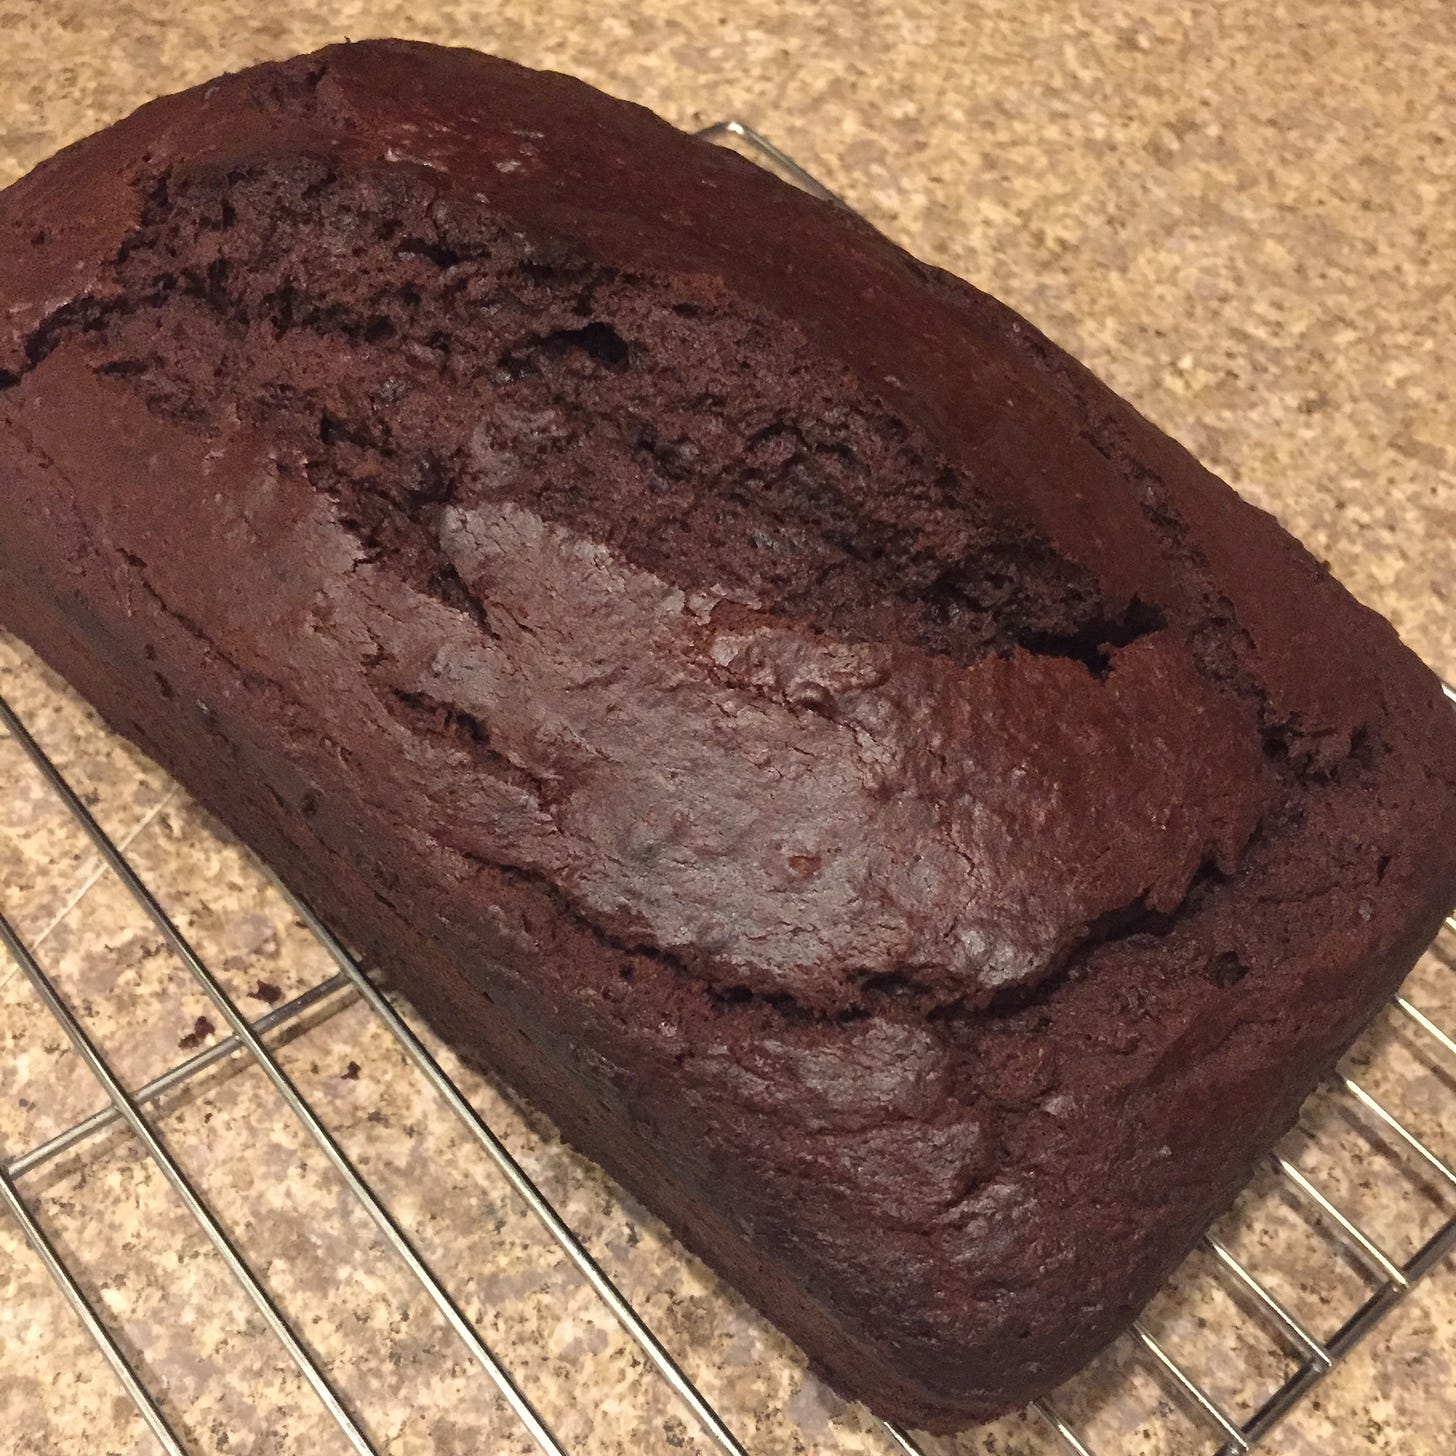 on a cooling rack, a dark brown loaf of chocolate banana bread, cracked open across the top.